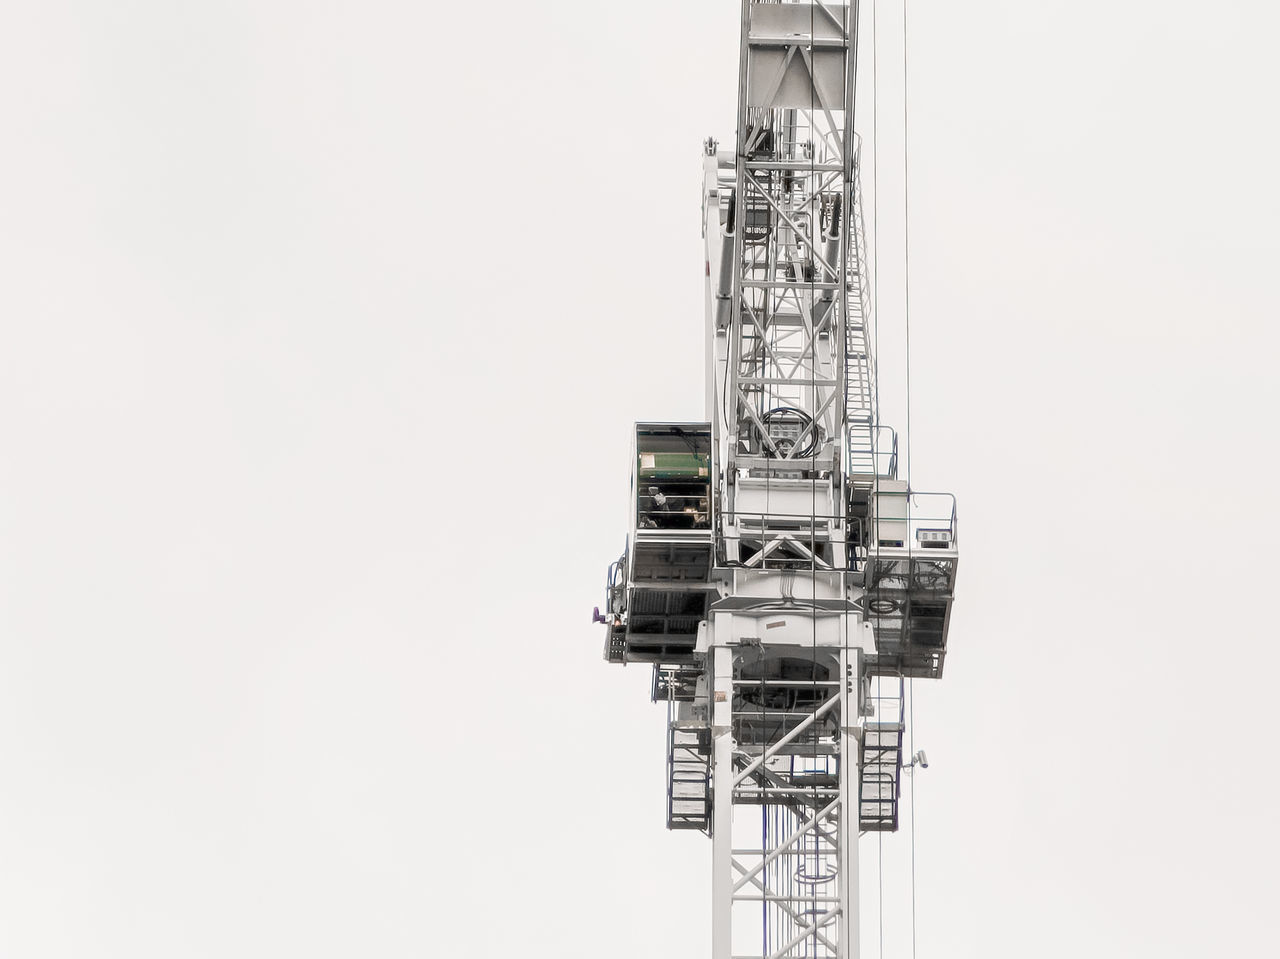 built structure, copy space, drilling rig, tower, architecture, no people, construction equipment, technology, industry, sky, vehicle, crane - construction machinery, communications tower, metal, nature, machinery, outdoors, business finance and industry, development